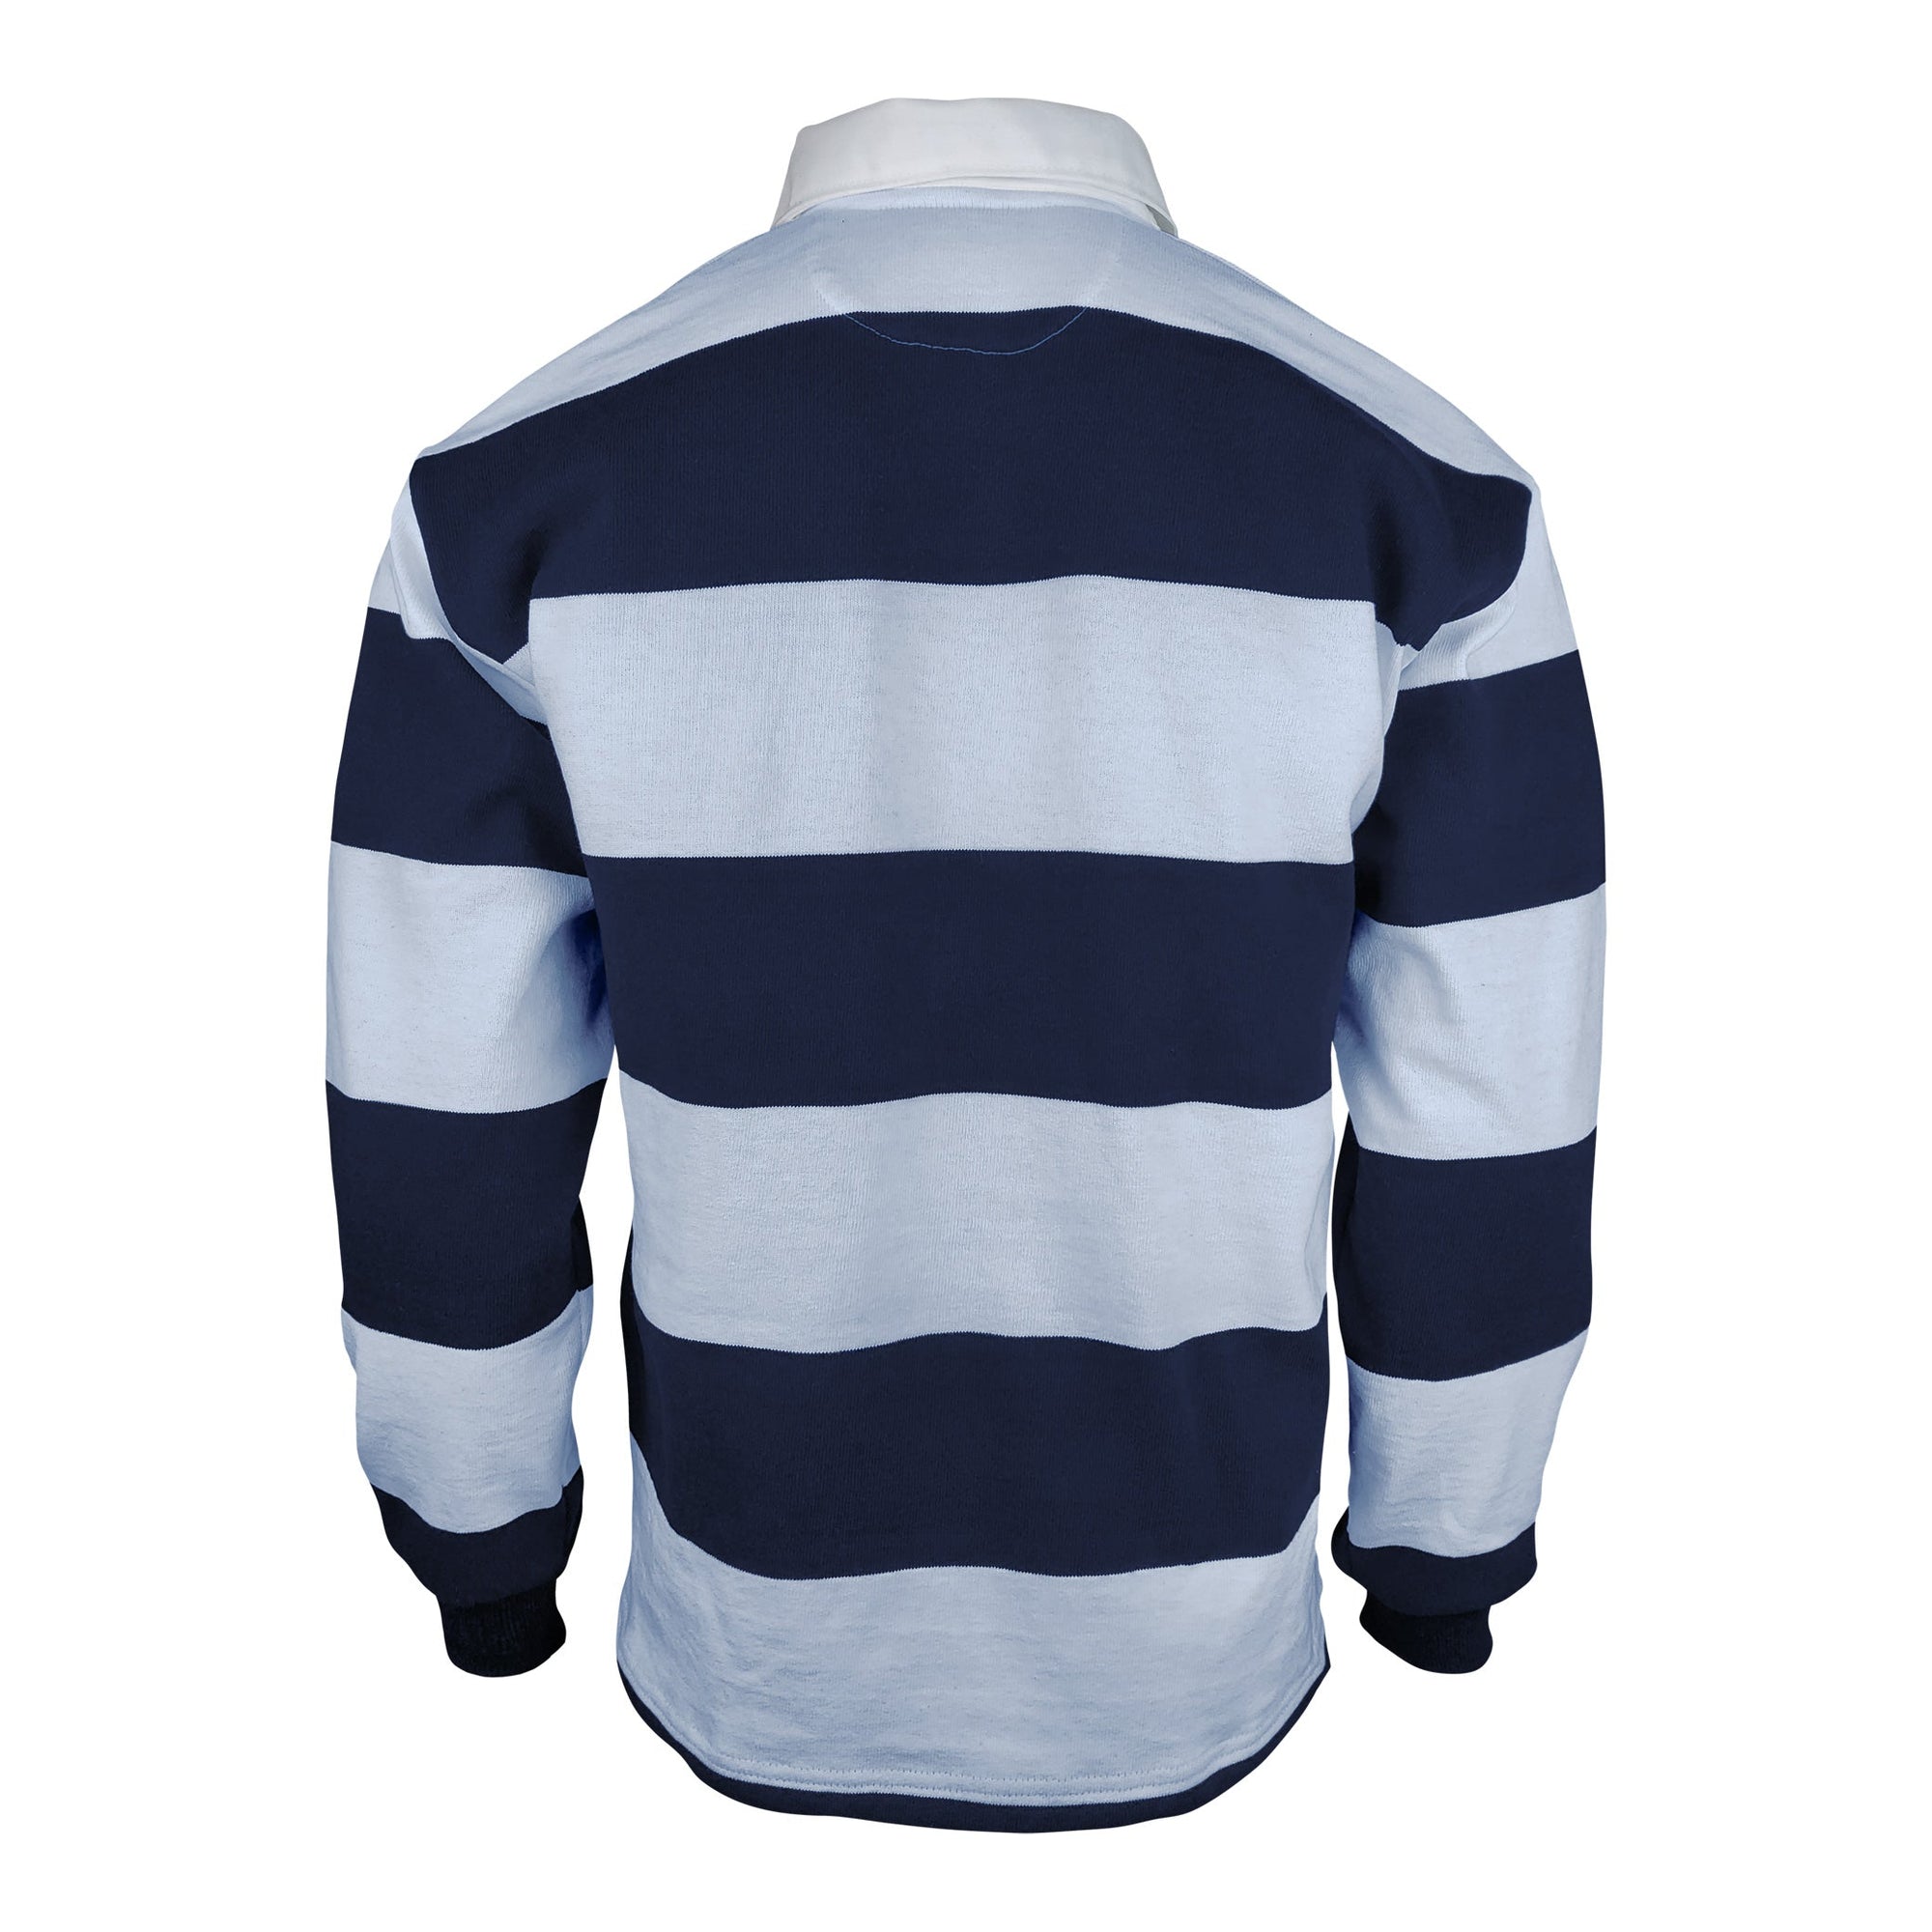 Rugby Imports MCWRC Casual Weight Stripe Jersey